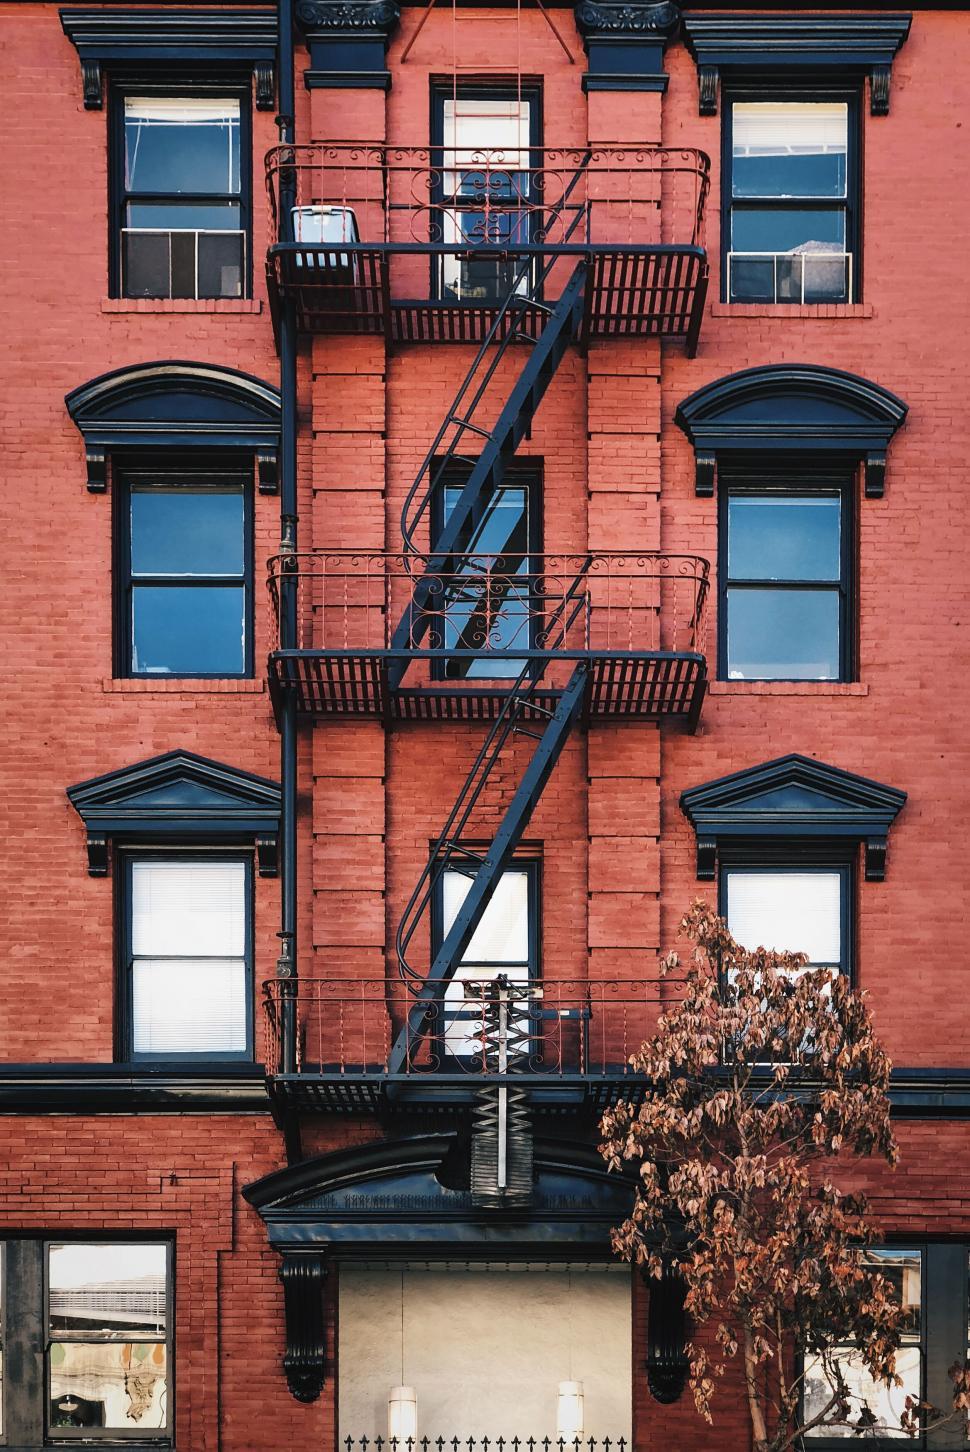 Free Image of Red Brick Building with External Fire Escape 